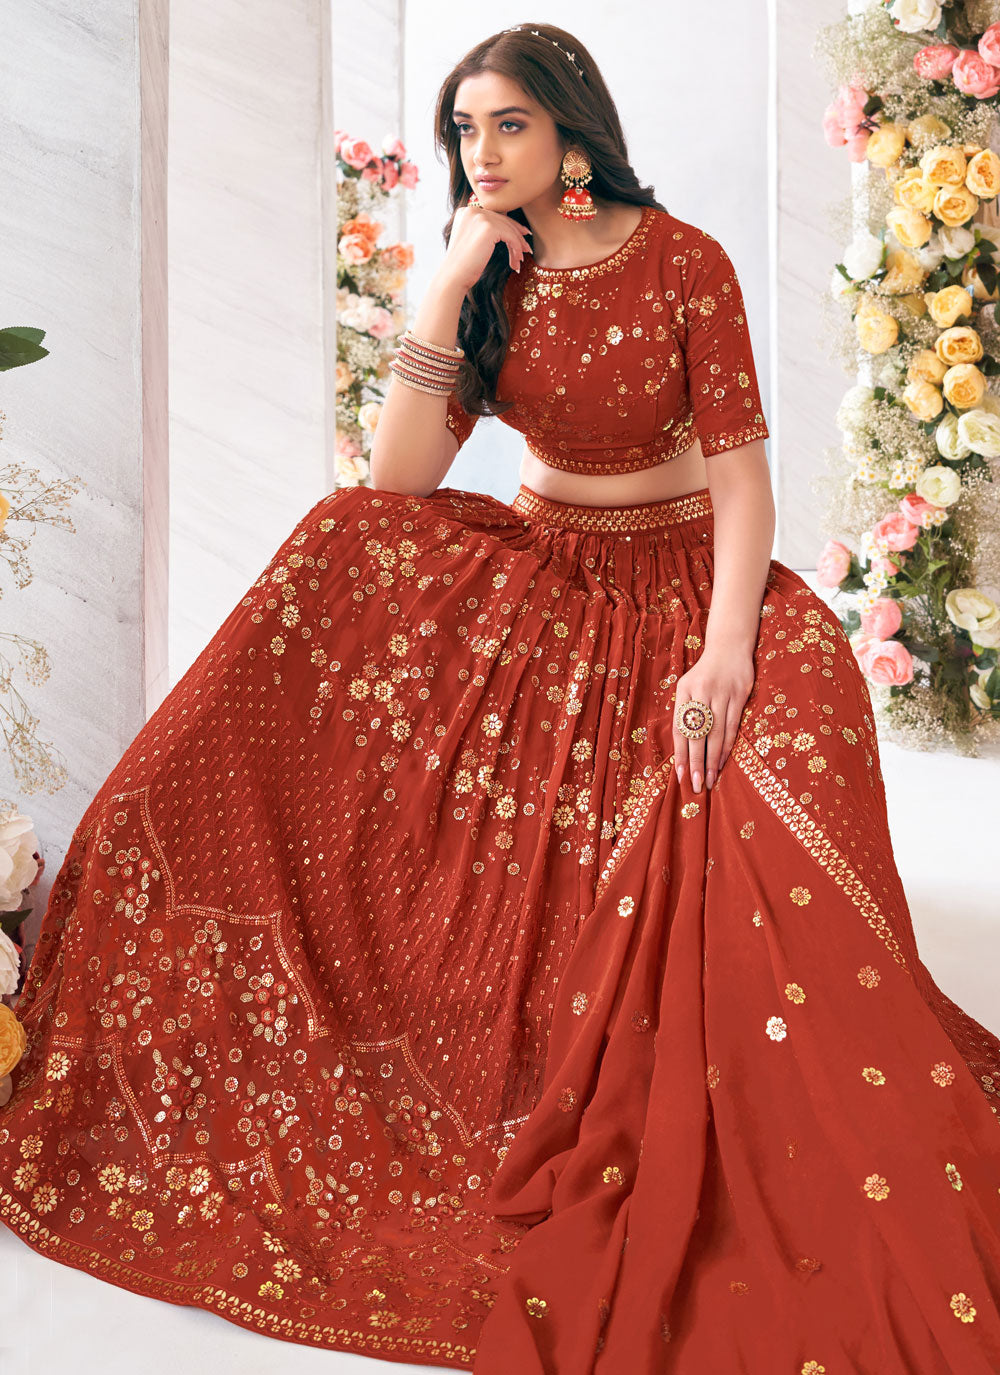 Staring Brown Georgette Readymade Lehenga Choli With Embroidered, Resham And Sequins Work